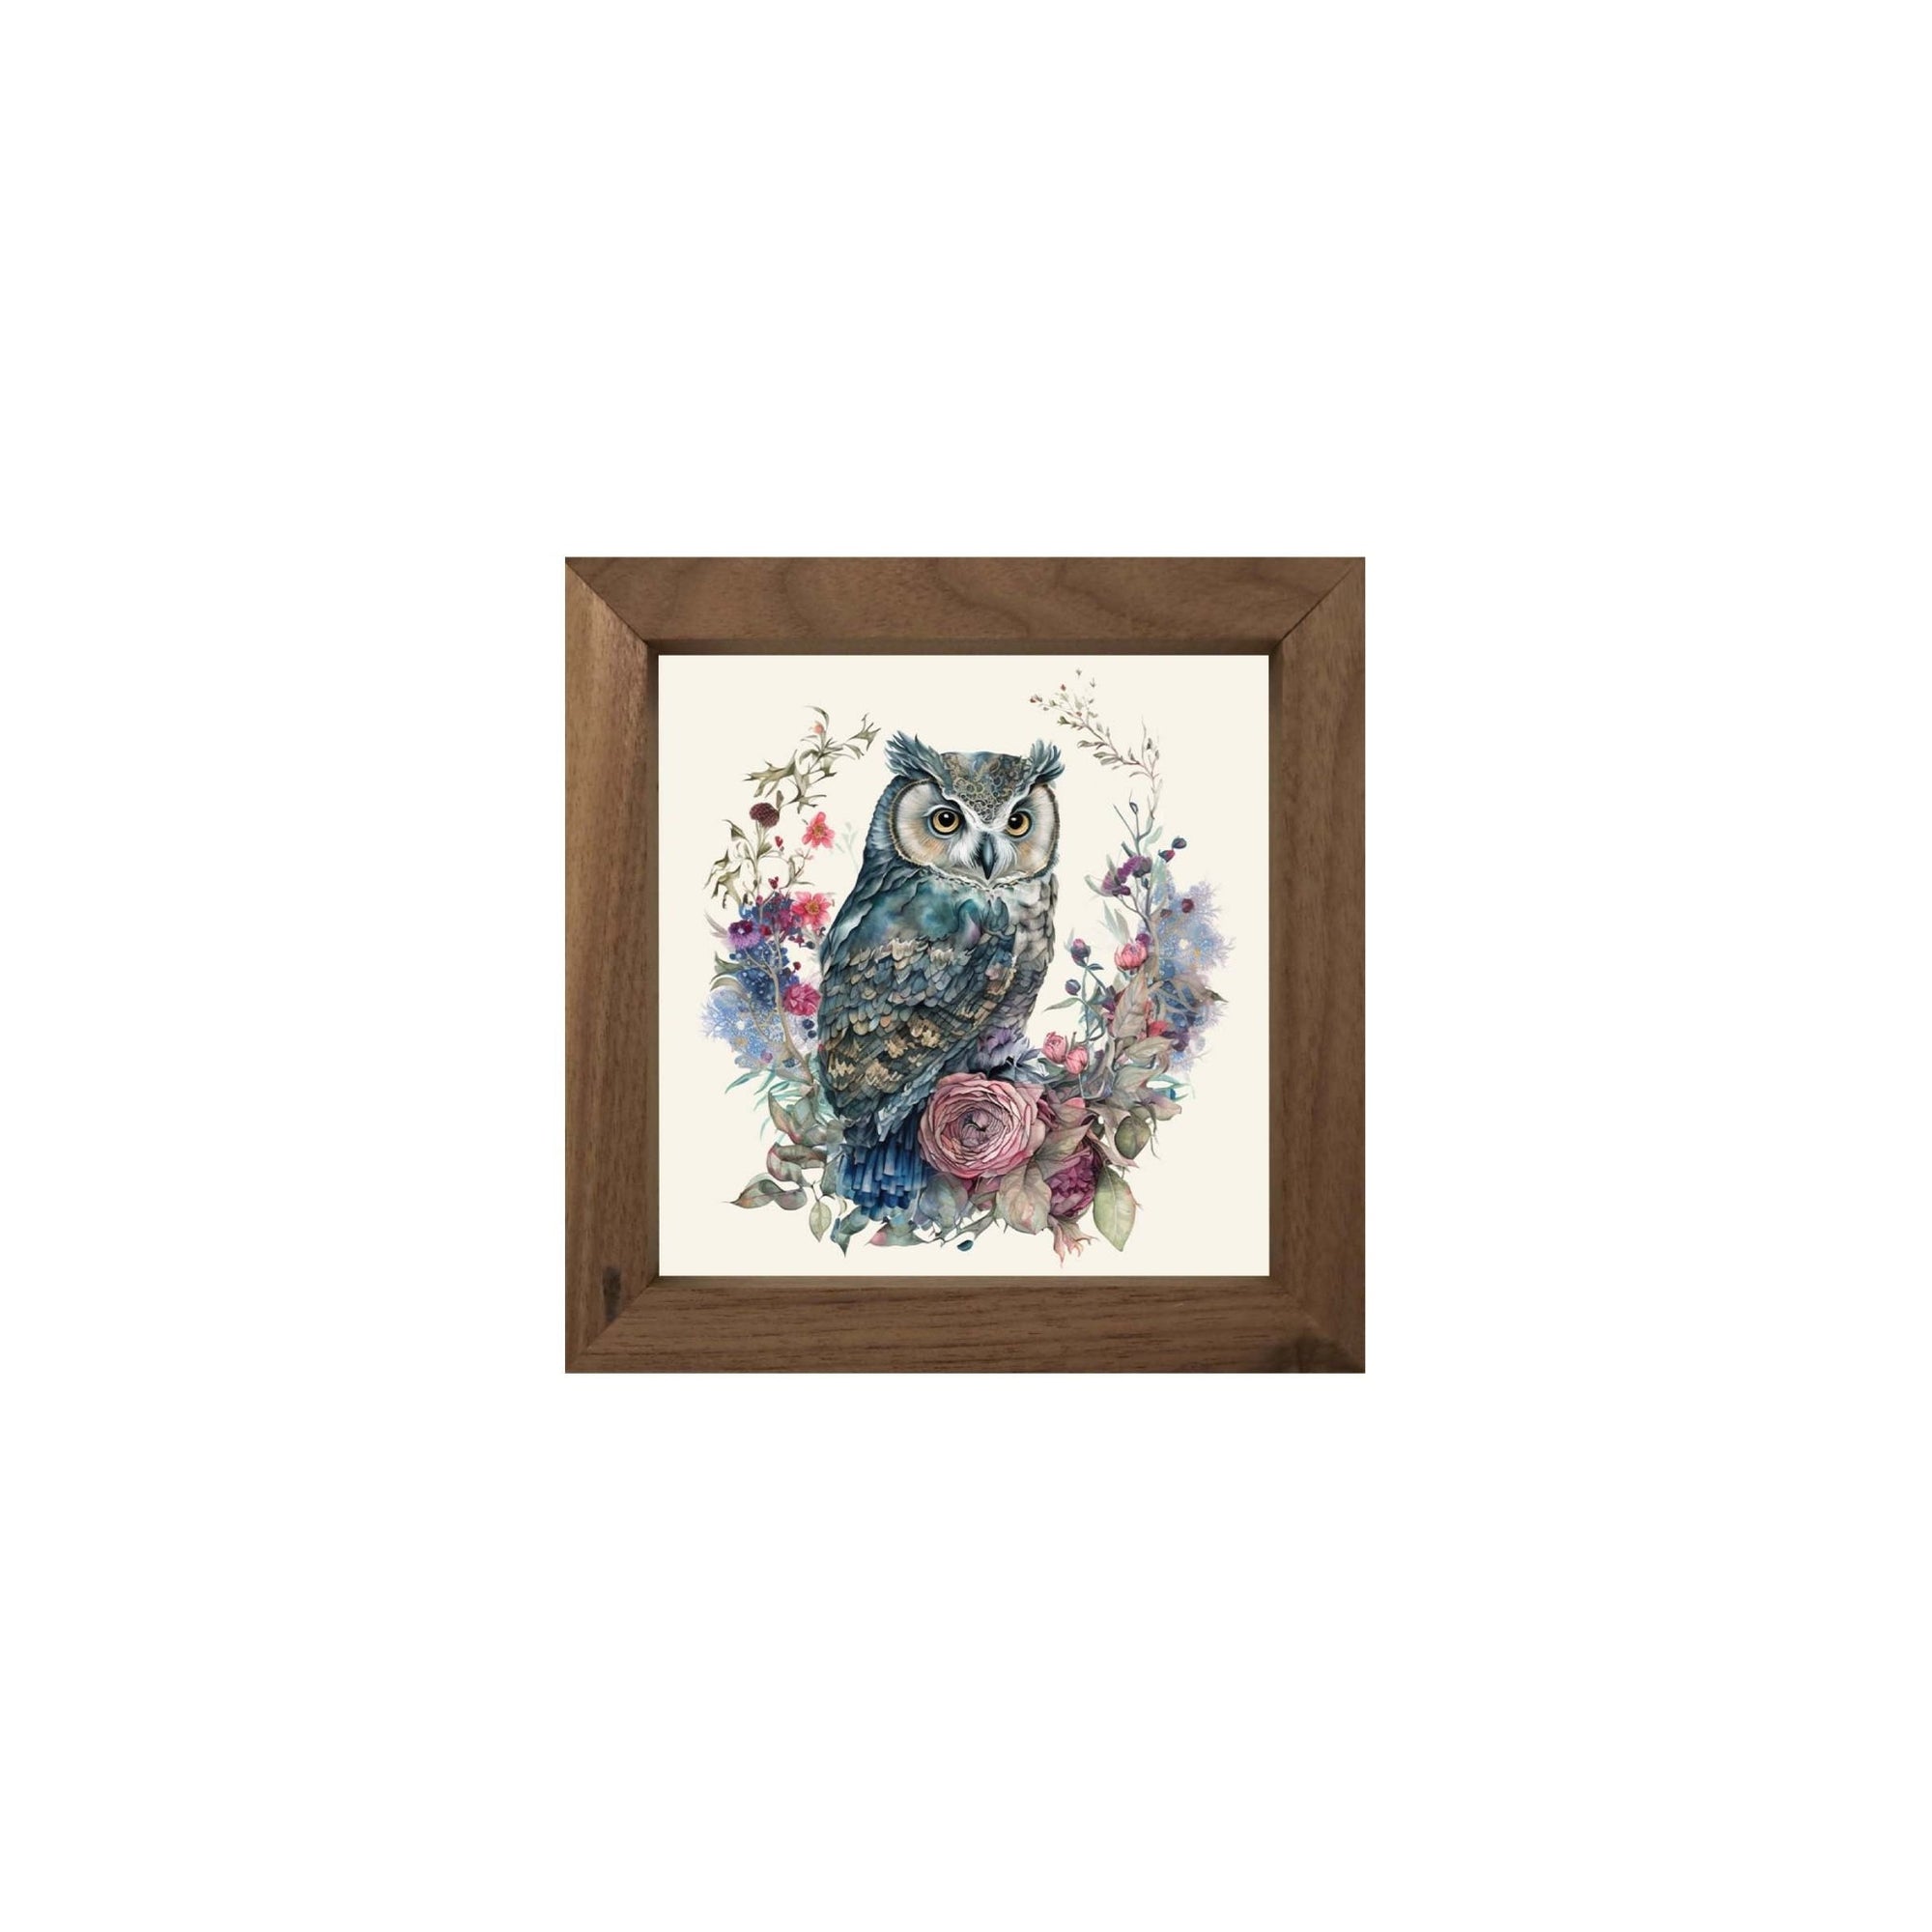 Owl Collection: 7x7 Wooden Wall Art Sign Framed Shadow Box| Large Owl - LifeSong Milestones